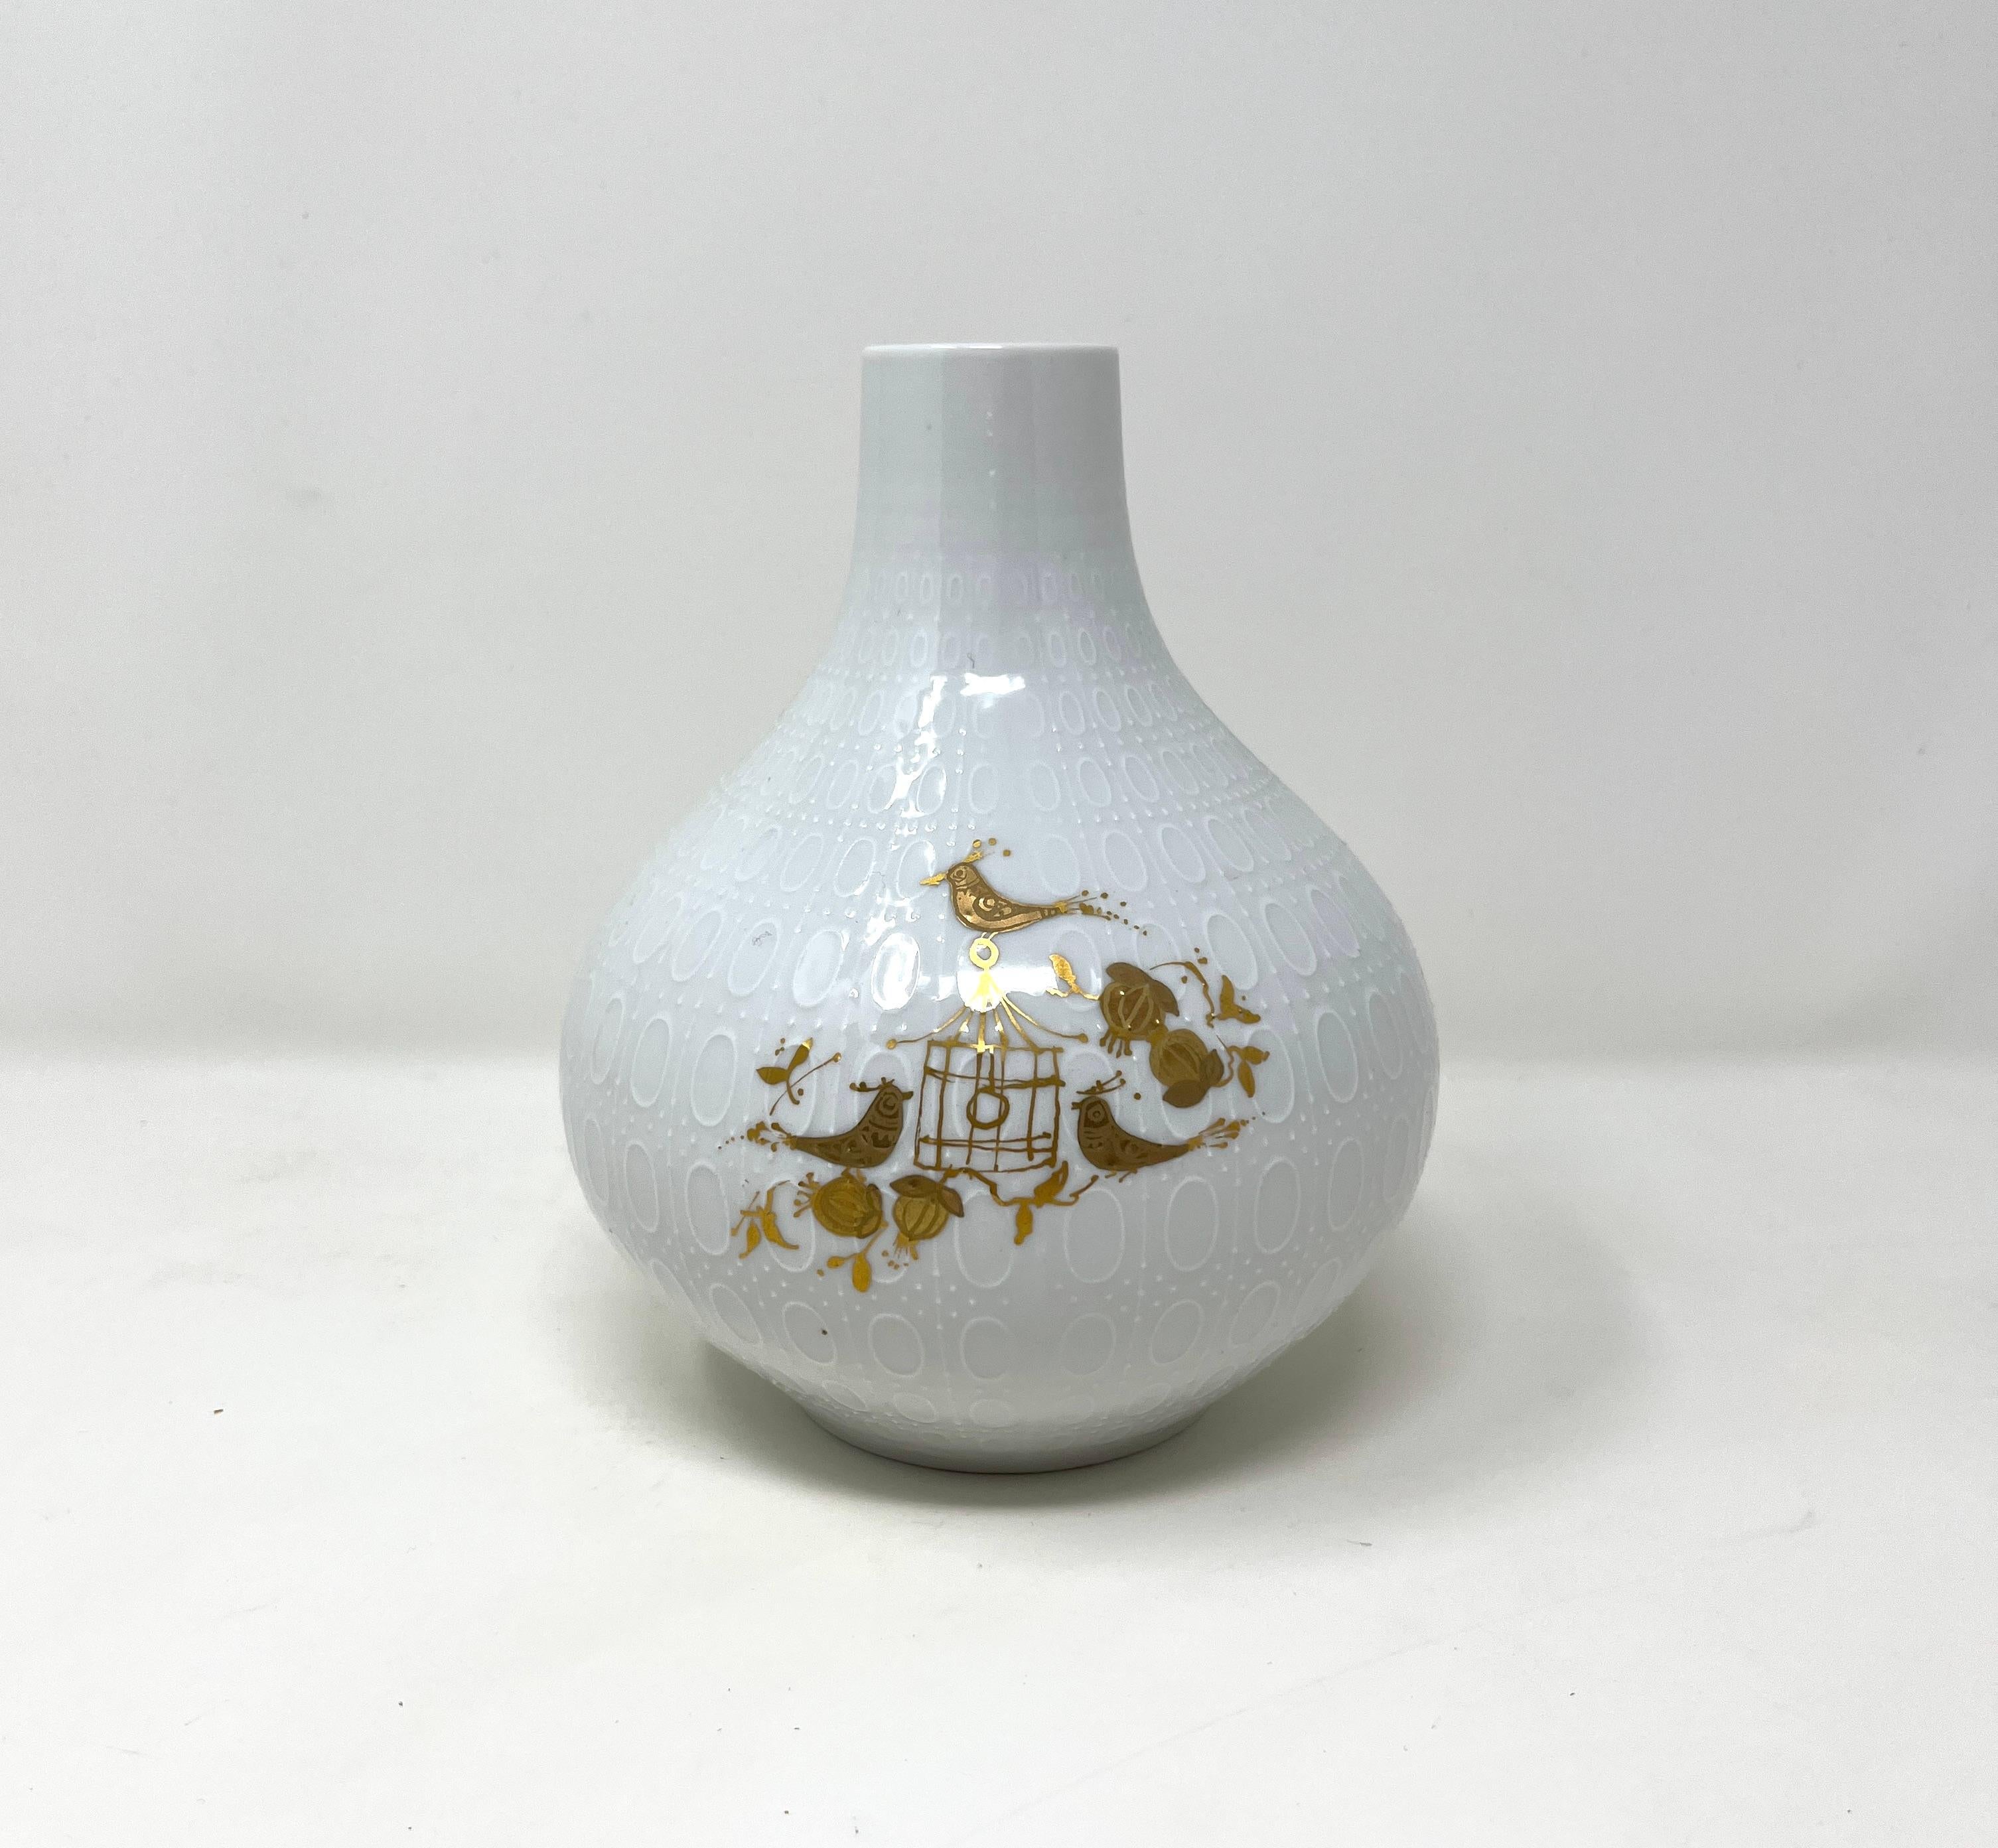 Bjorn Wiinblad for Rosenthal gourd form vase in porcelain with studded and oval relief. Hand painted in gold leaf, is a playful character prancing among the pumpkins; a childlike design typical of Wiinblad's artistry.

(The gold is even; the